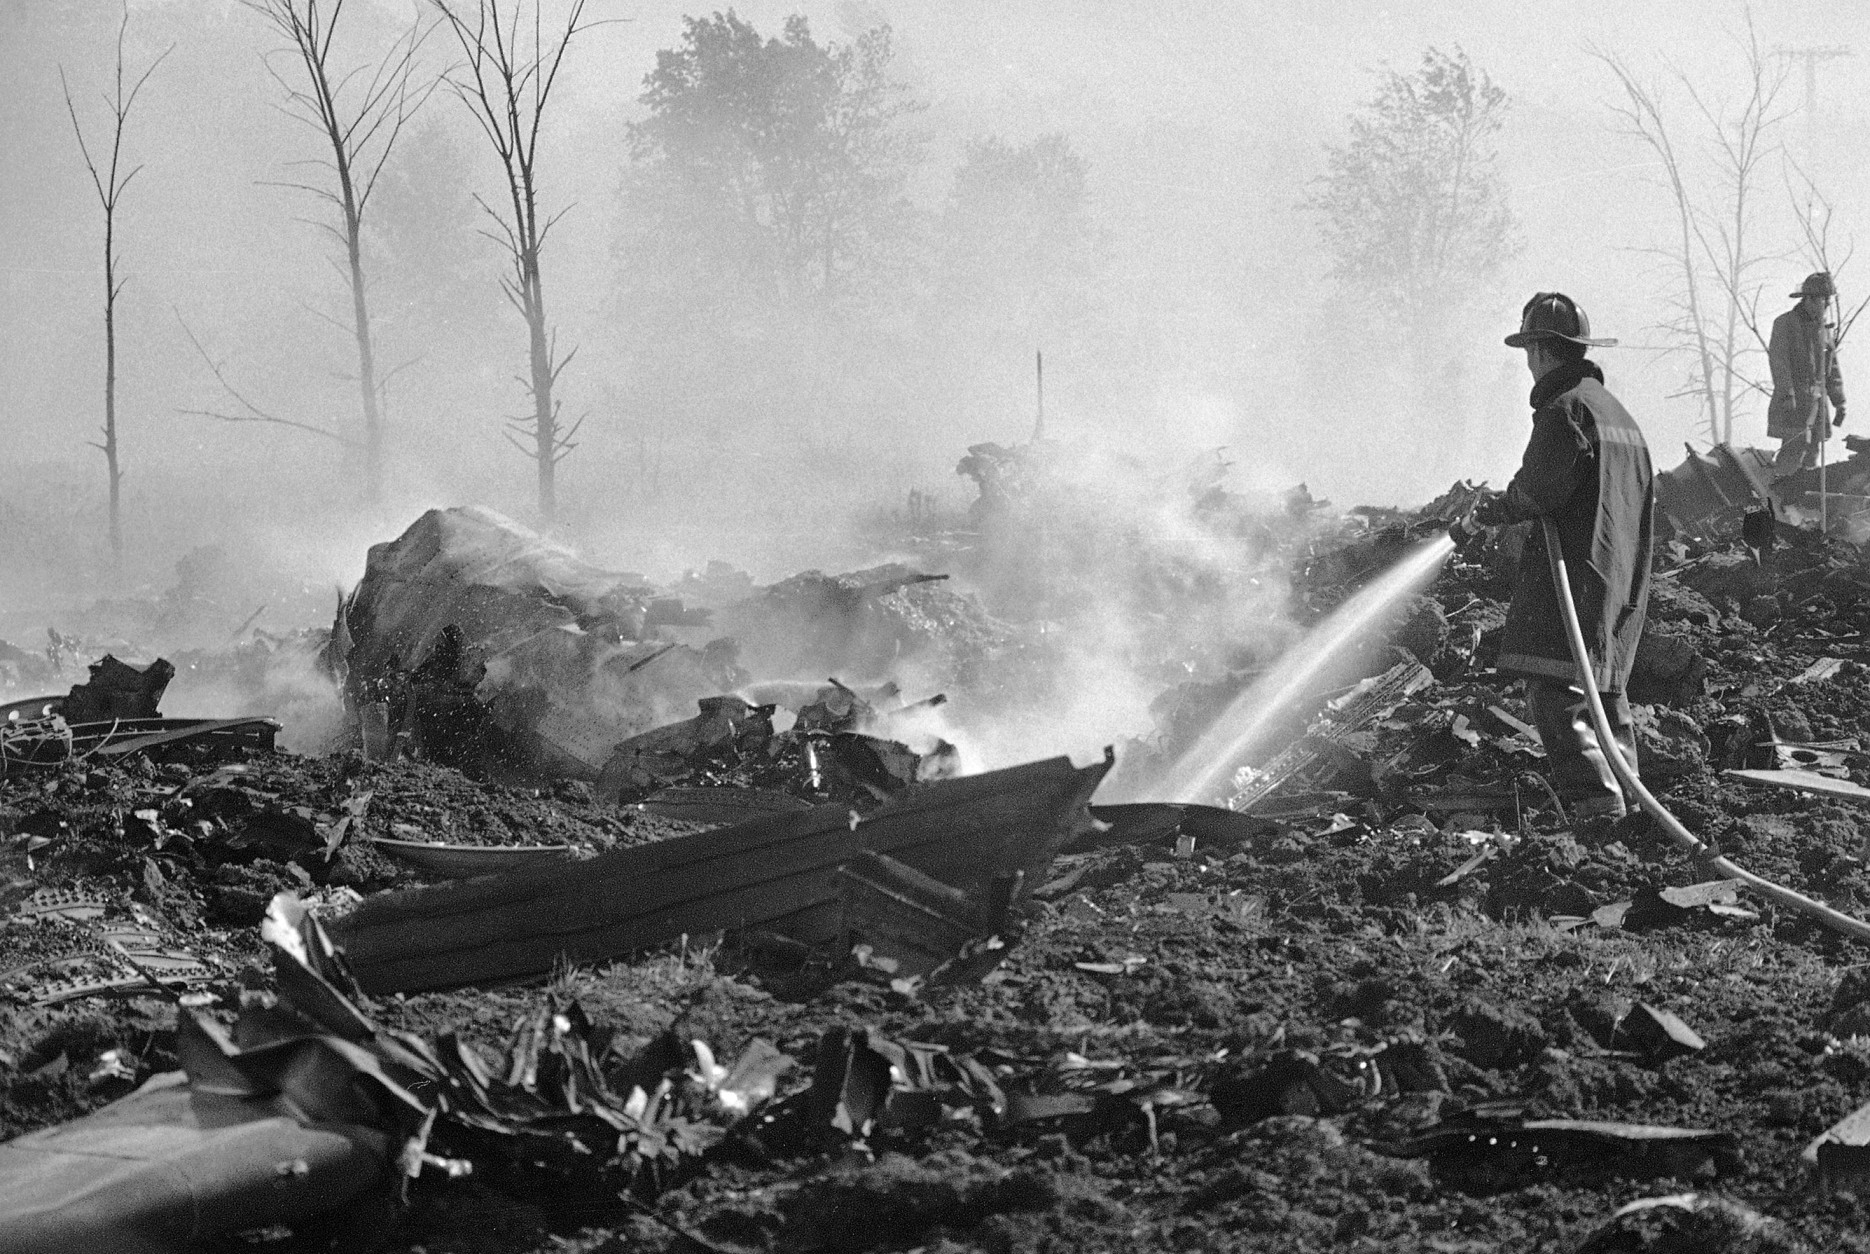 A fireman hoses down twisted remains of an American Airlines DC-10 which crashed and exploded on takeoff from O'Hare International Airport, killing 279 passengers, May 25, 1979.  (AP Photo/Fred Jewell)